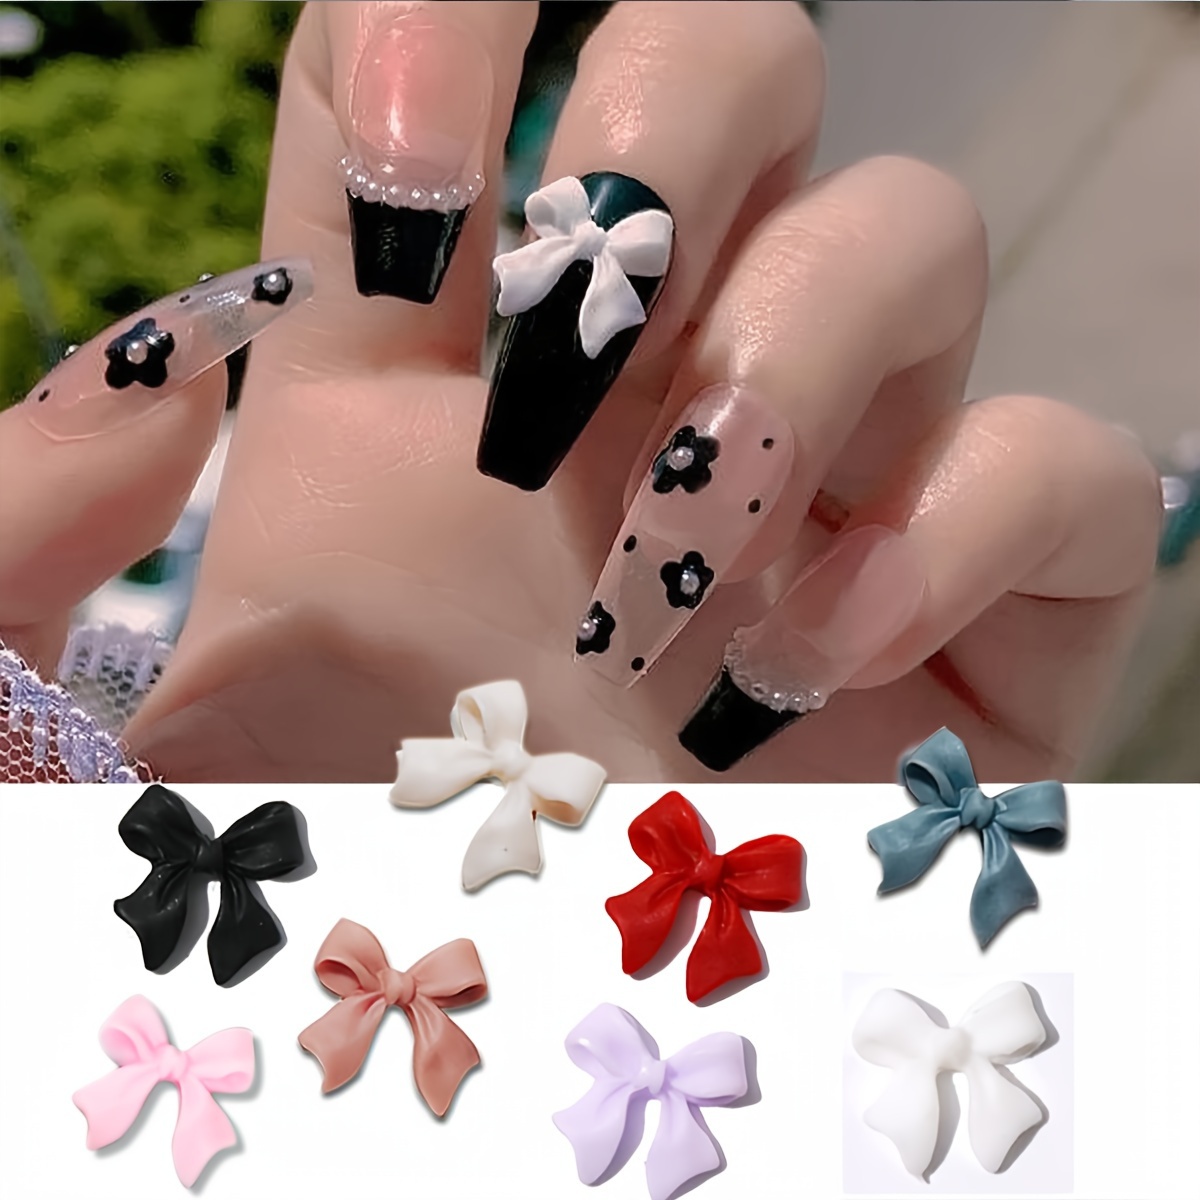 

100 Pcs Bow Nail Charms Colorful 3d Bowknot Nail Art Accessories For Acrylic Nails Cute Resin Butterfly Diy Manicure Decoration Tips, Nail Art Craft